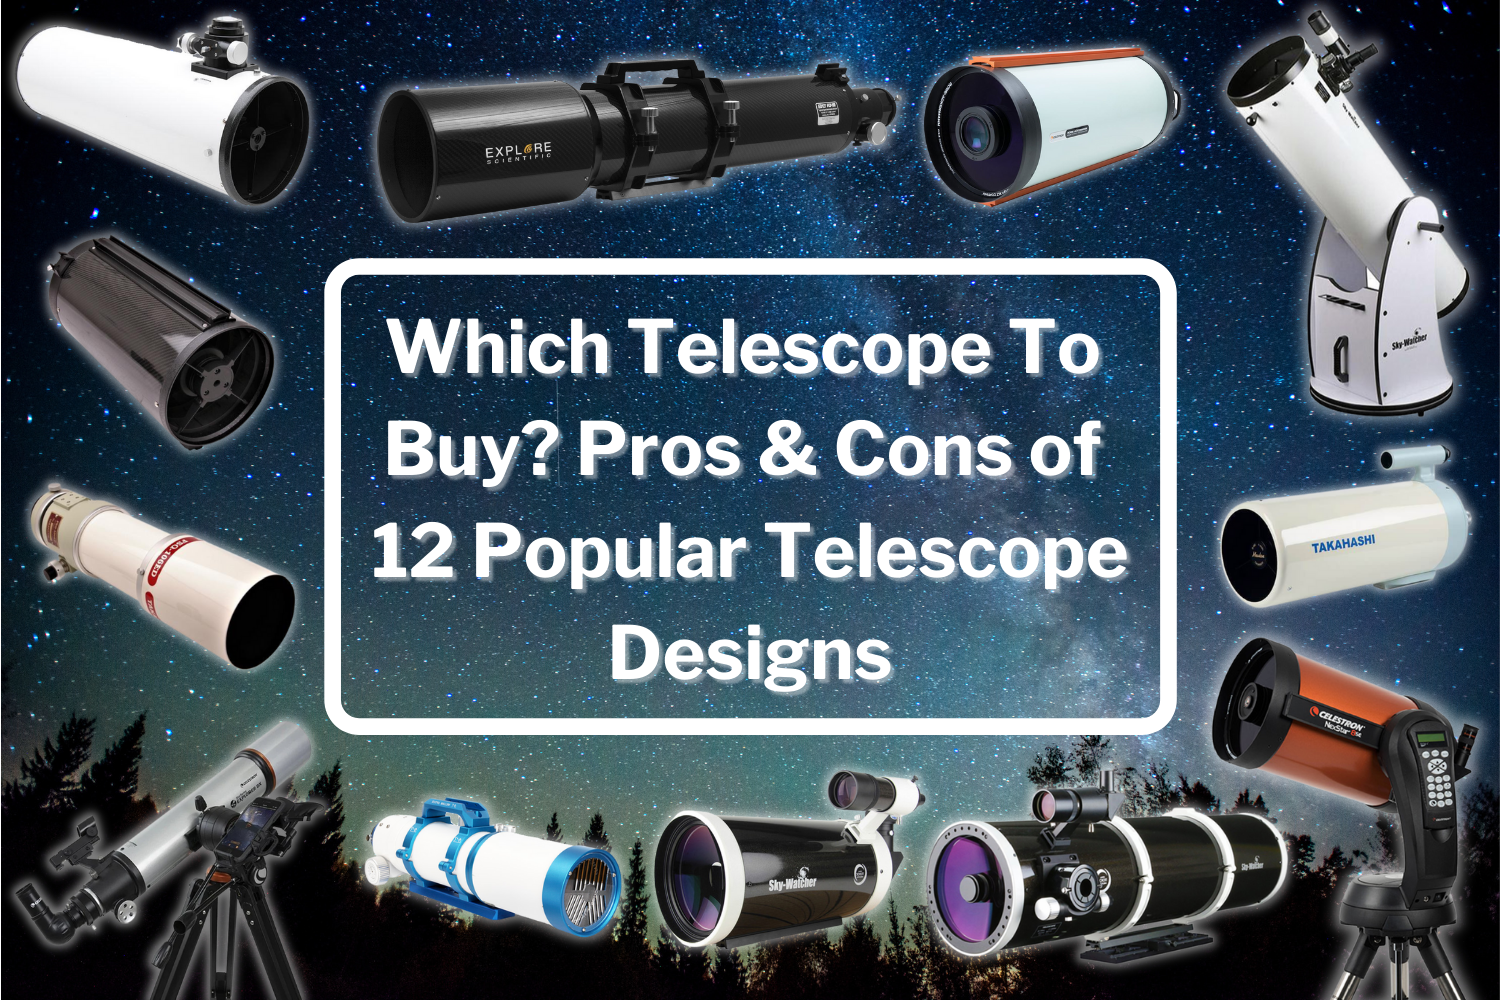 Which Telescope To Buy? Pros & Cons of 12 Popular Telescope Designs